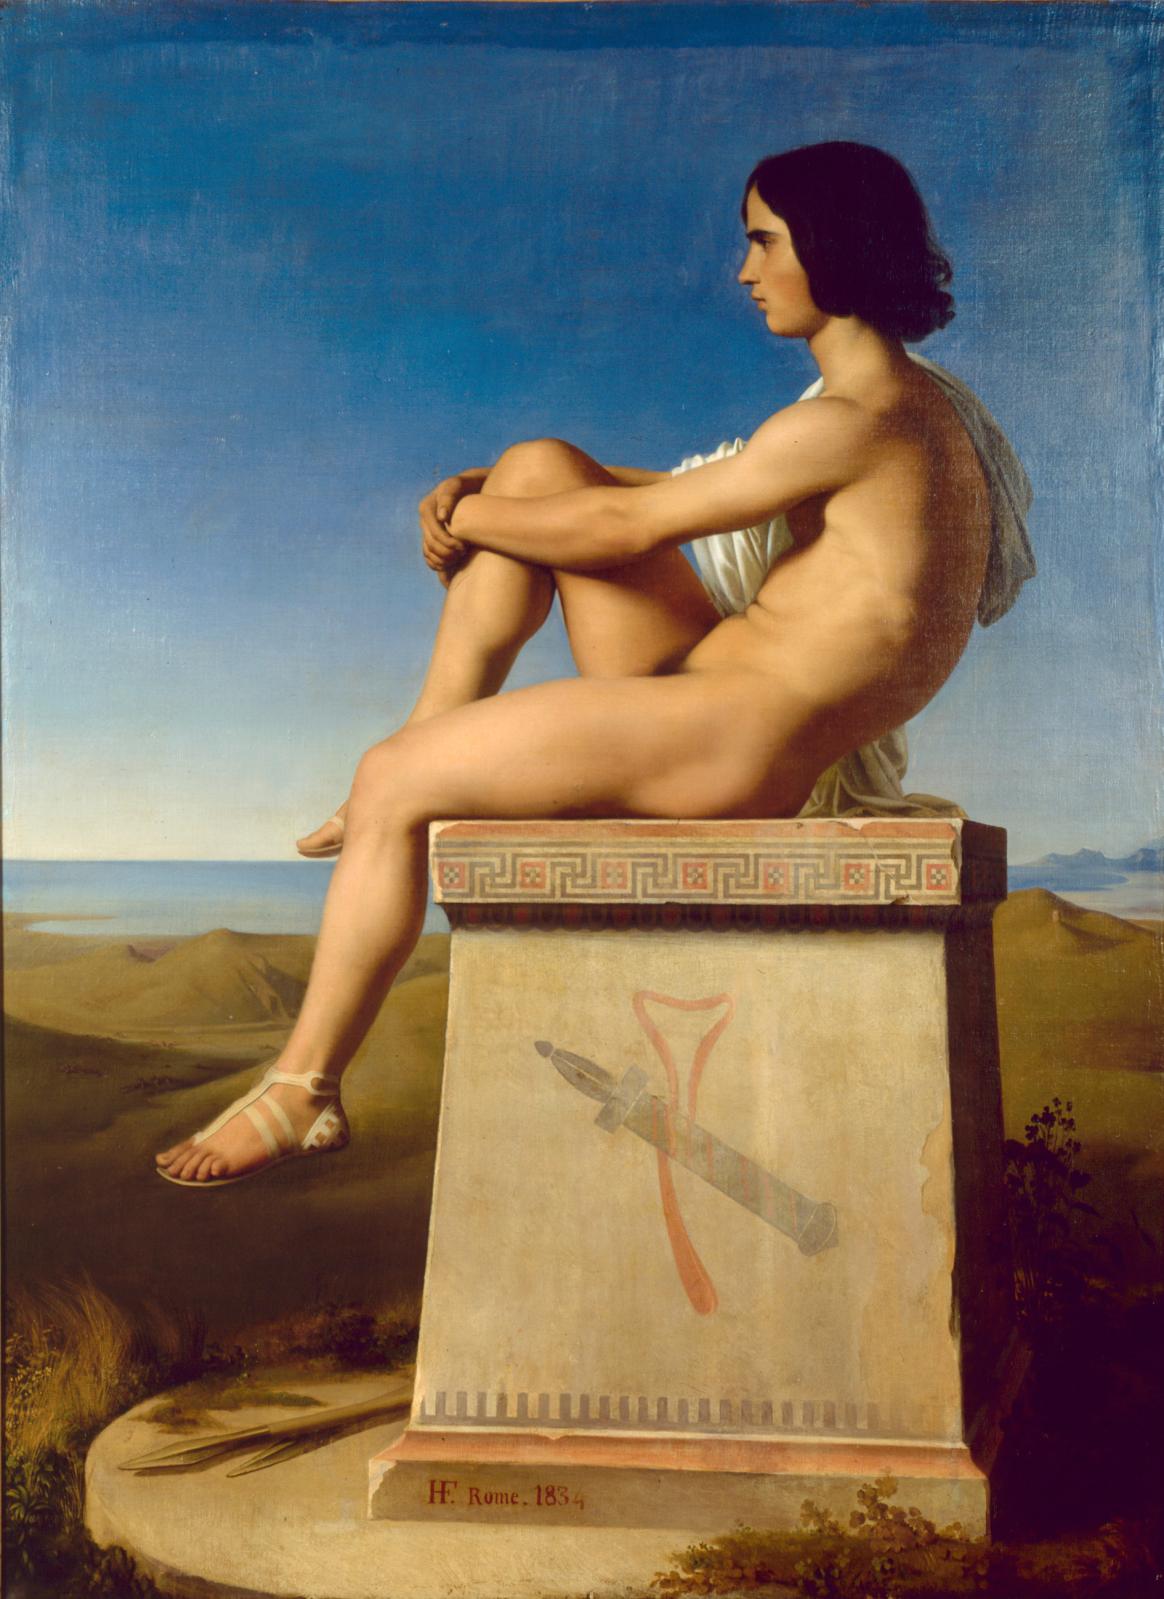 The Flandrin Brothers: An Exhilarating Exhibition at Lyon's Musée des Beaux-Arts